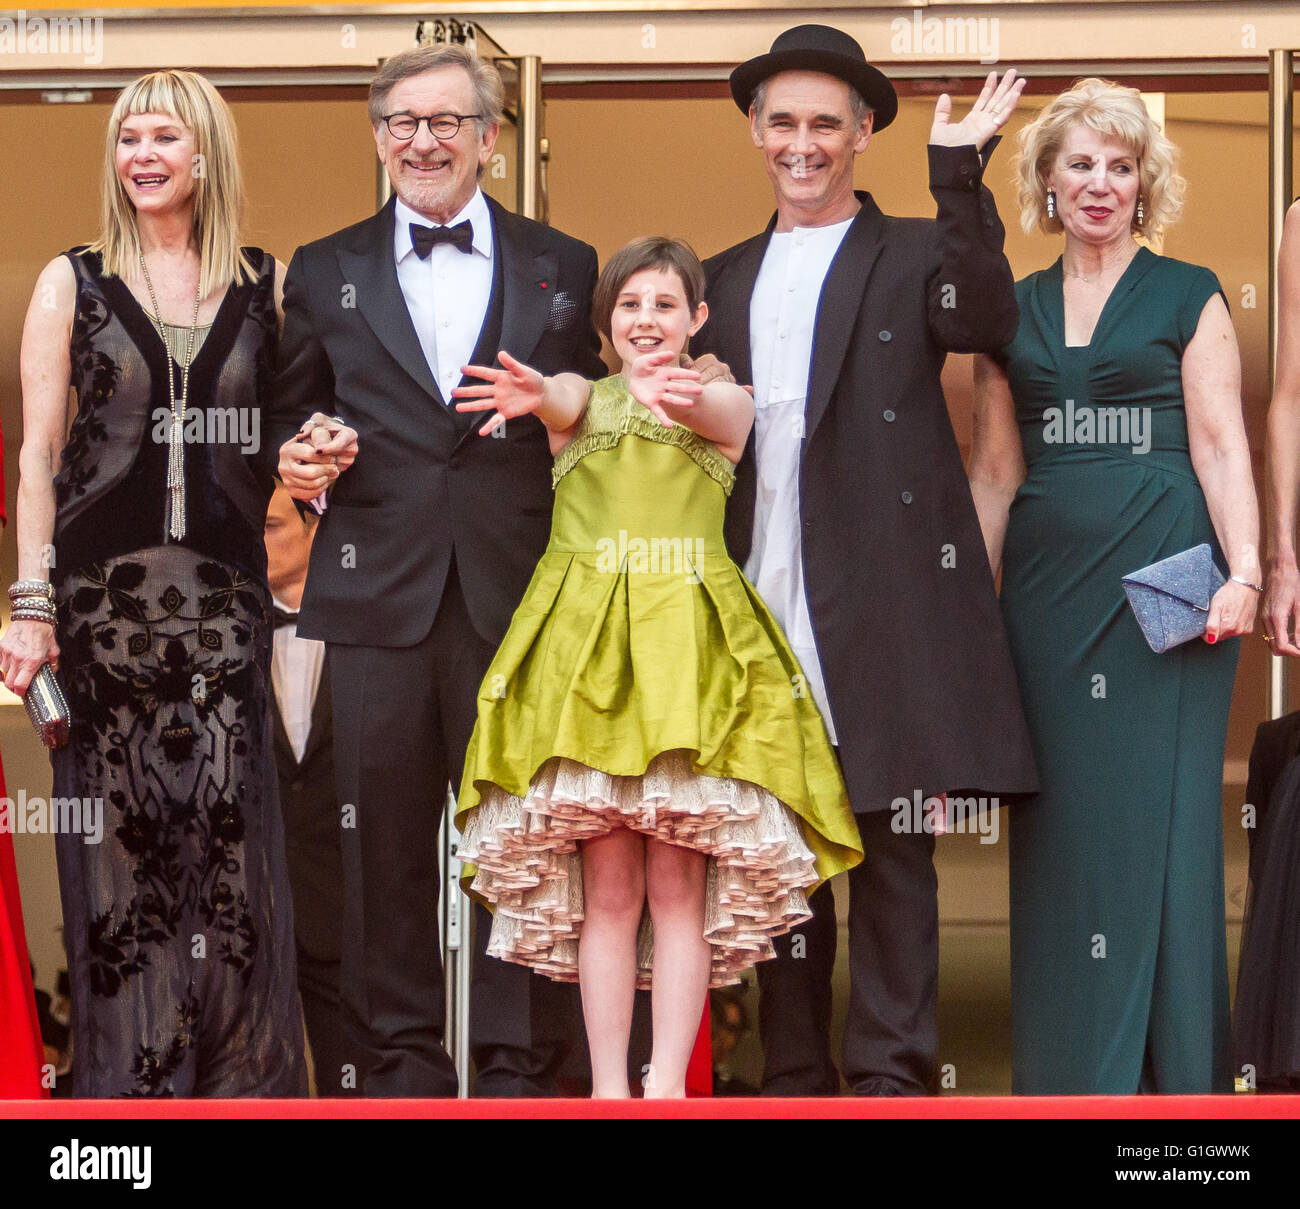 STEVEN SPIELBERG, KATE CAPSHAW, RUBY BARNHILL, MARK RYLANCE  ACTORS AND DIRECTOR  THE BFG. PREMIERE 69TH CANNES FILM FESTIVAL  CANNES, , FRANCE  15 May 2016  DIW89327 Stock Photo